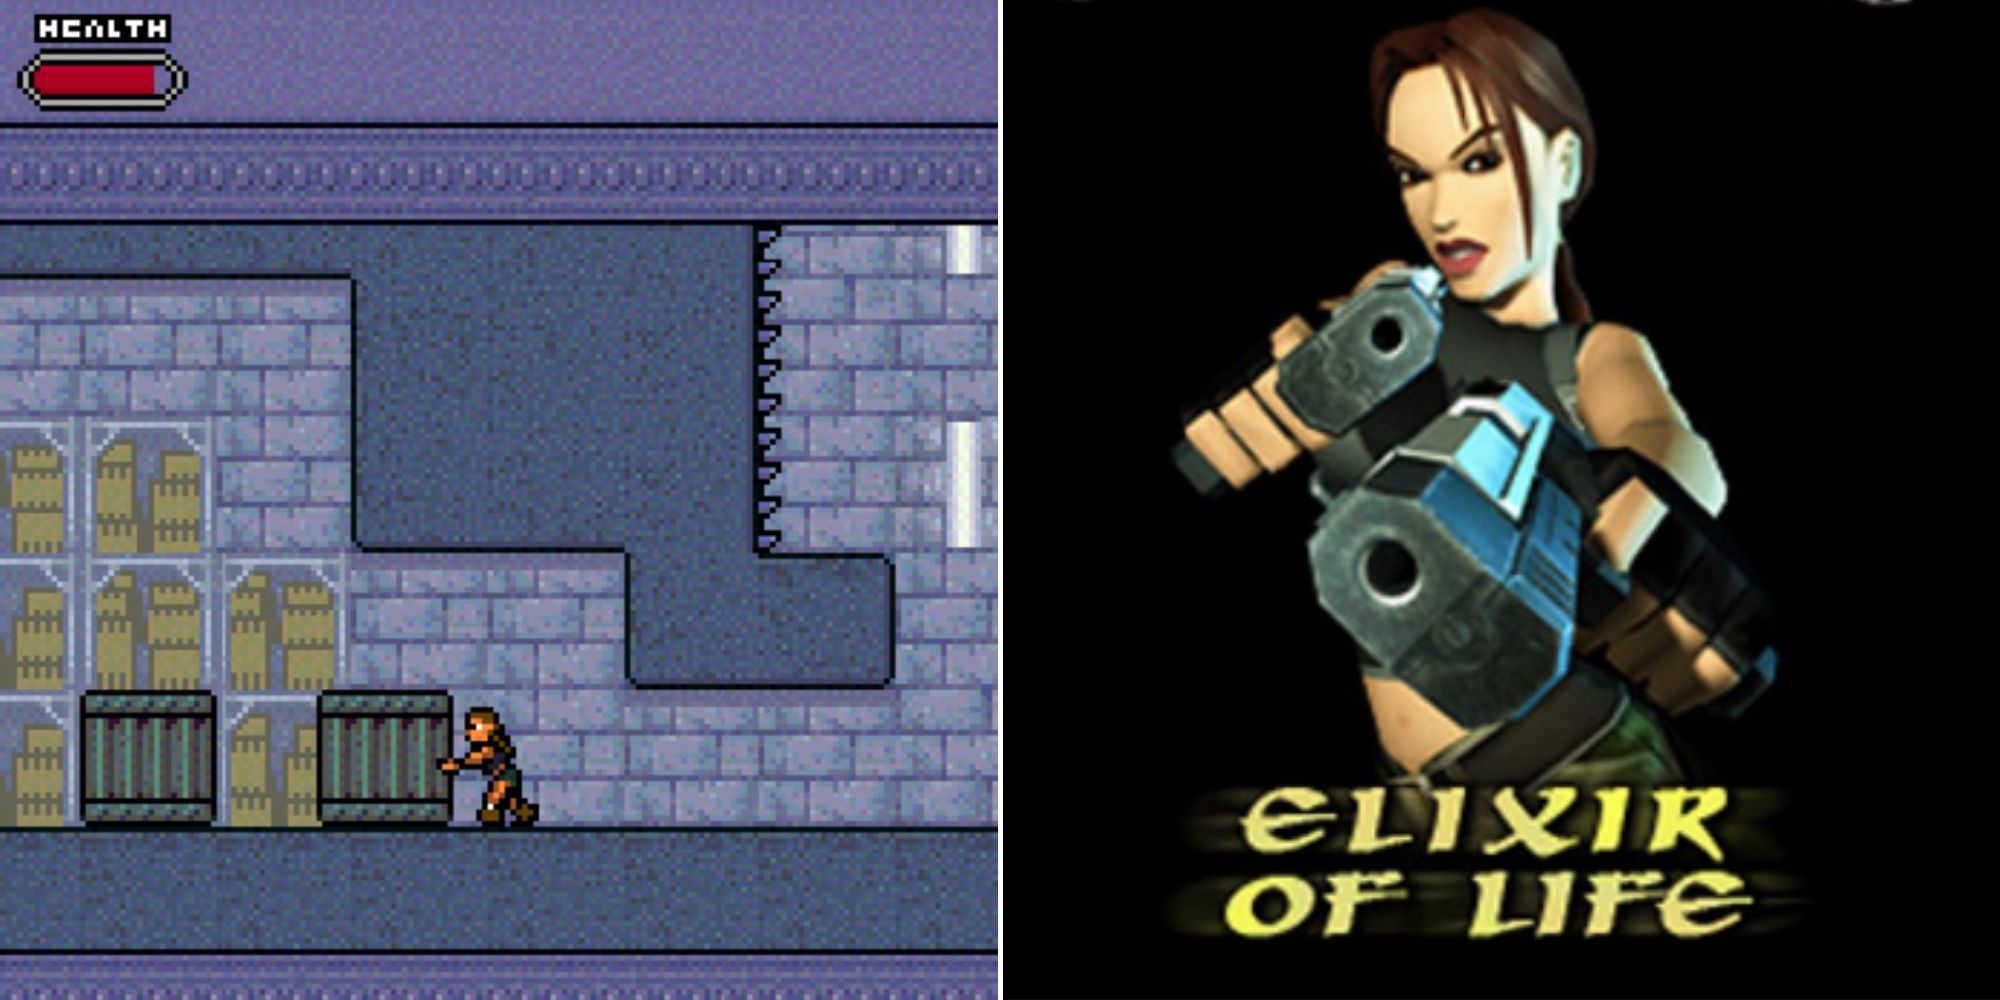 Lara moving a box In A 2D Side Scrolling View And The logo For Tomb Raider: Elixir of life